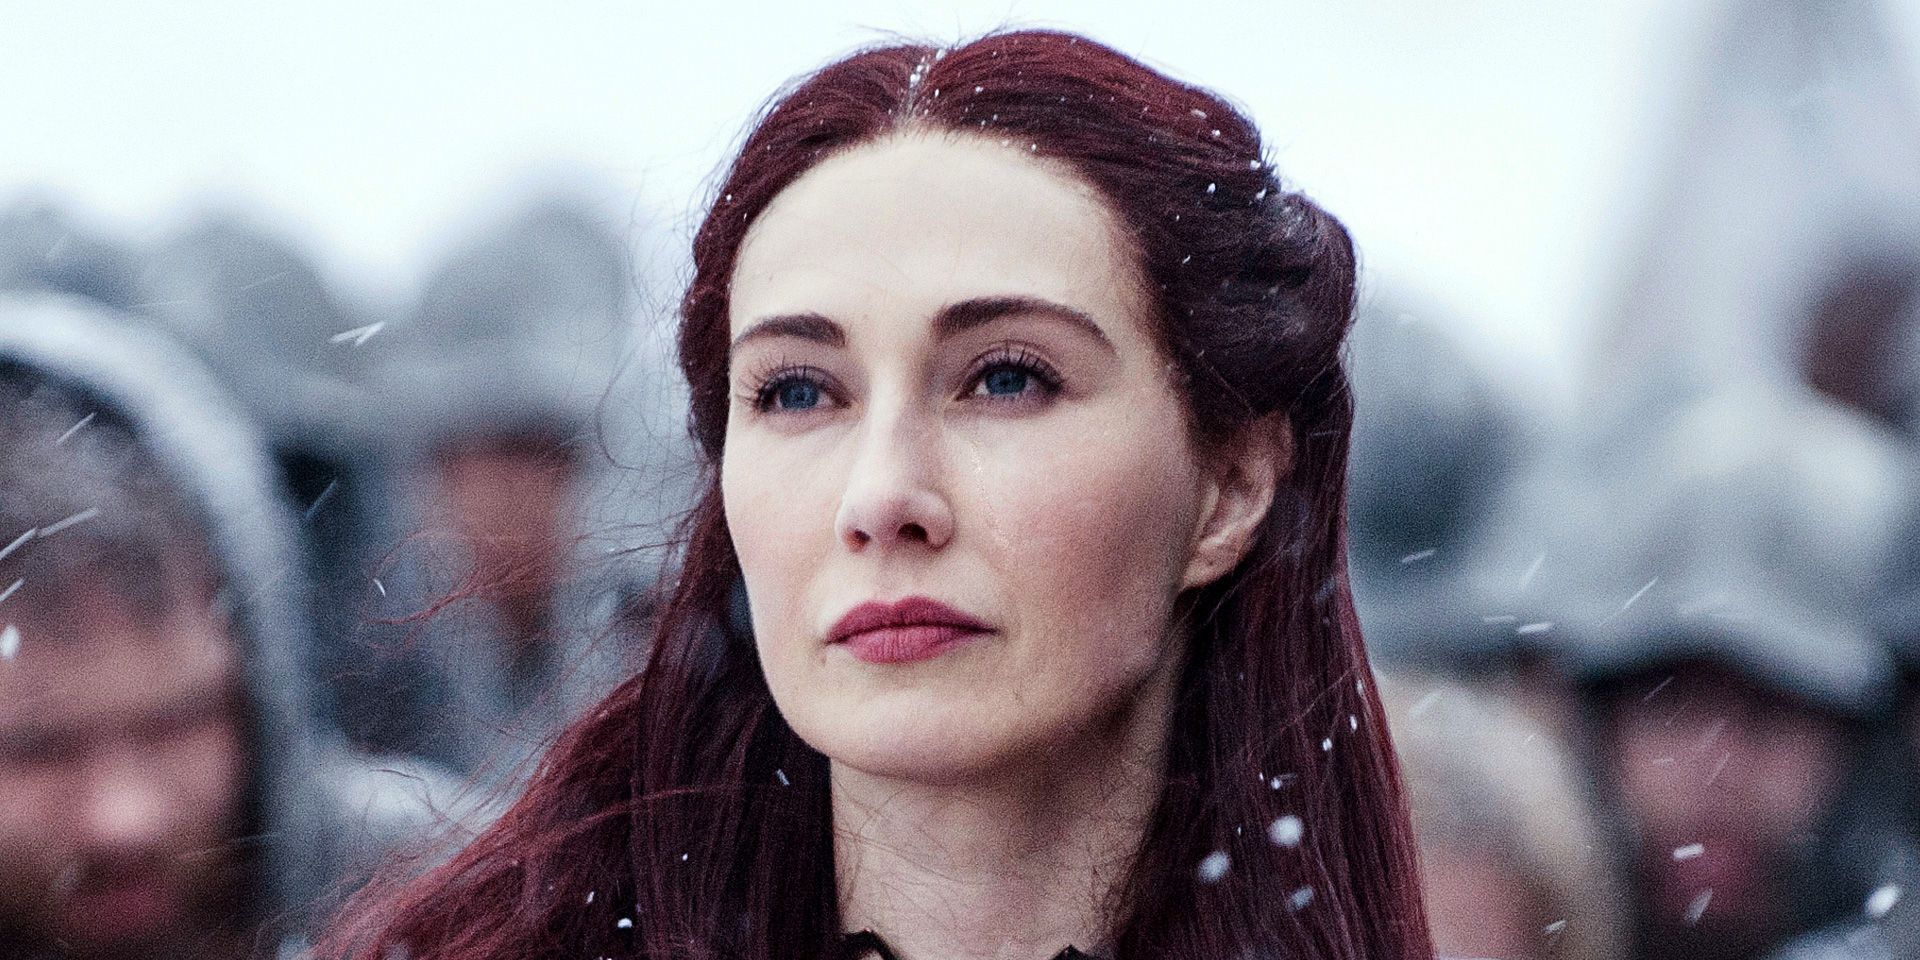 Melisandre in the Snow in Game of Thrones